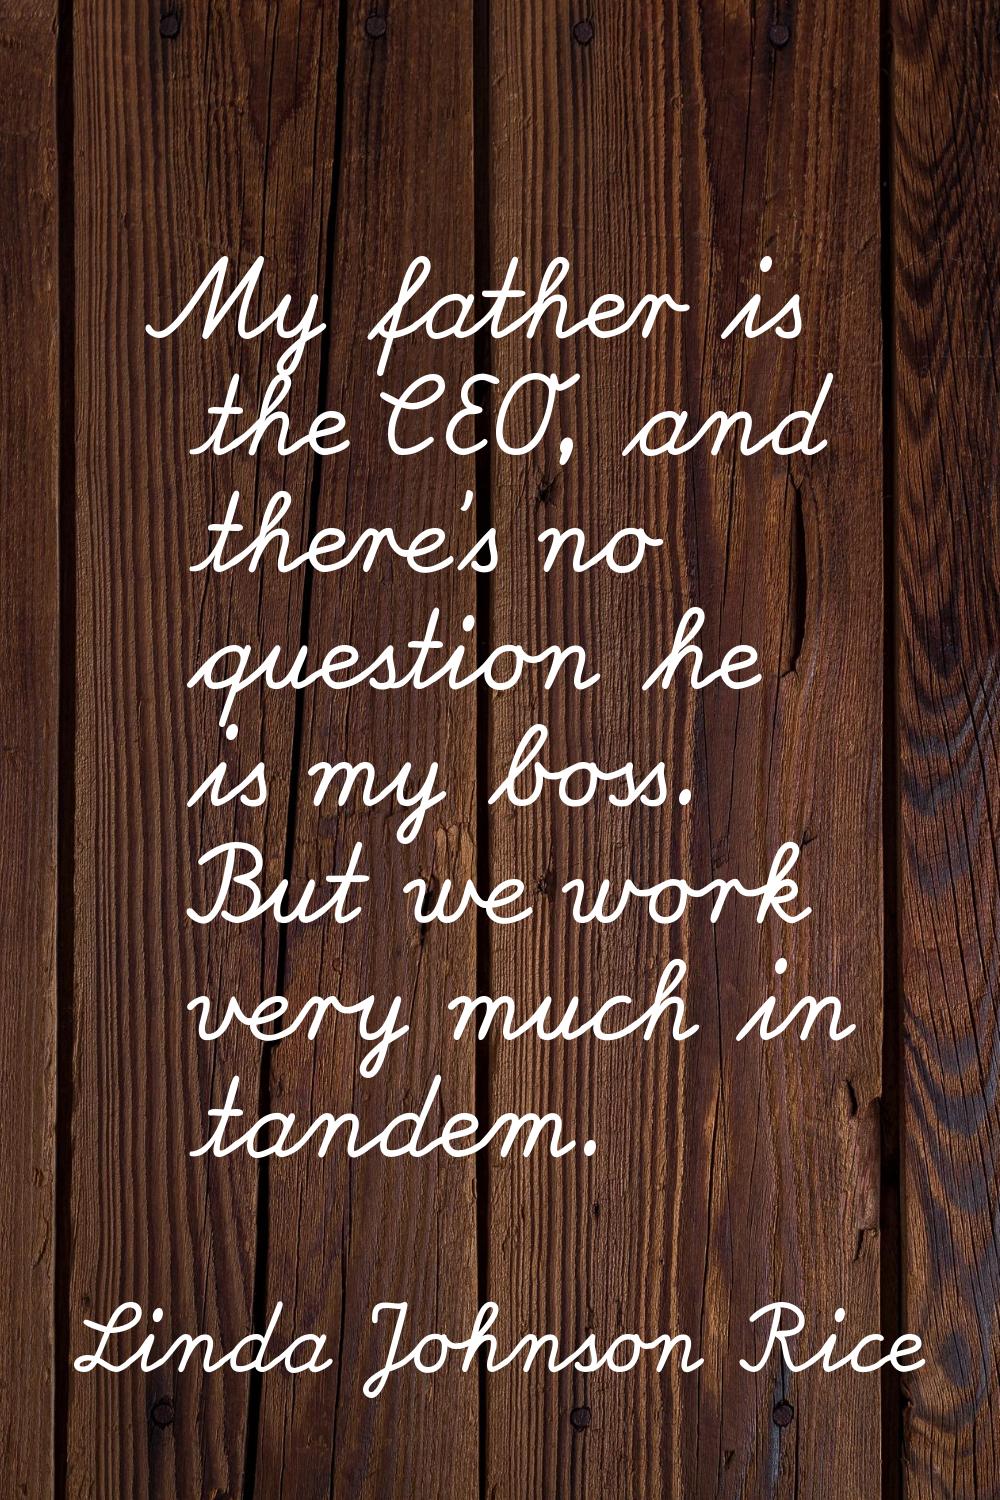 My father is the CEO, and there's no question he is my boss. But we work very much in tandem.